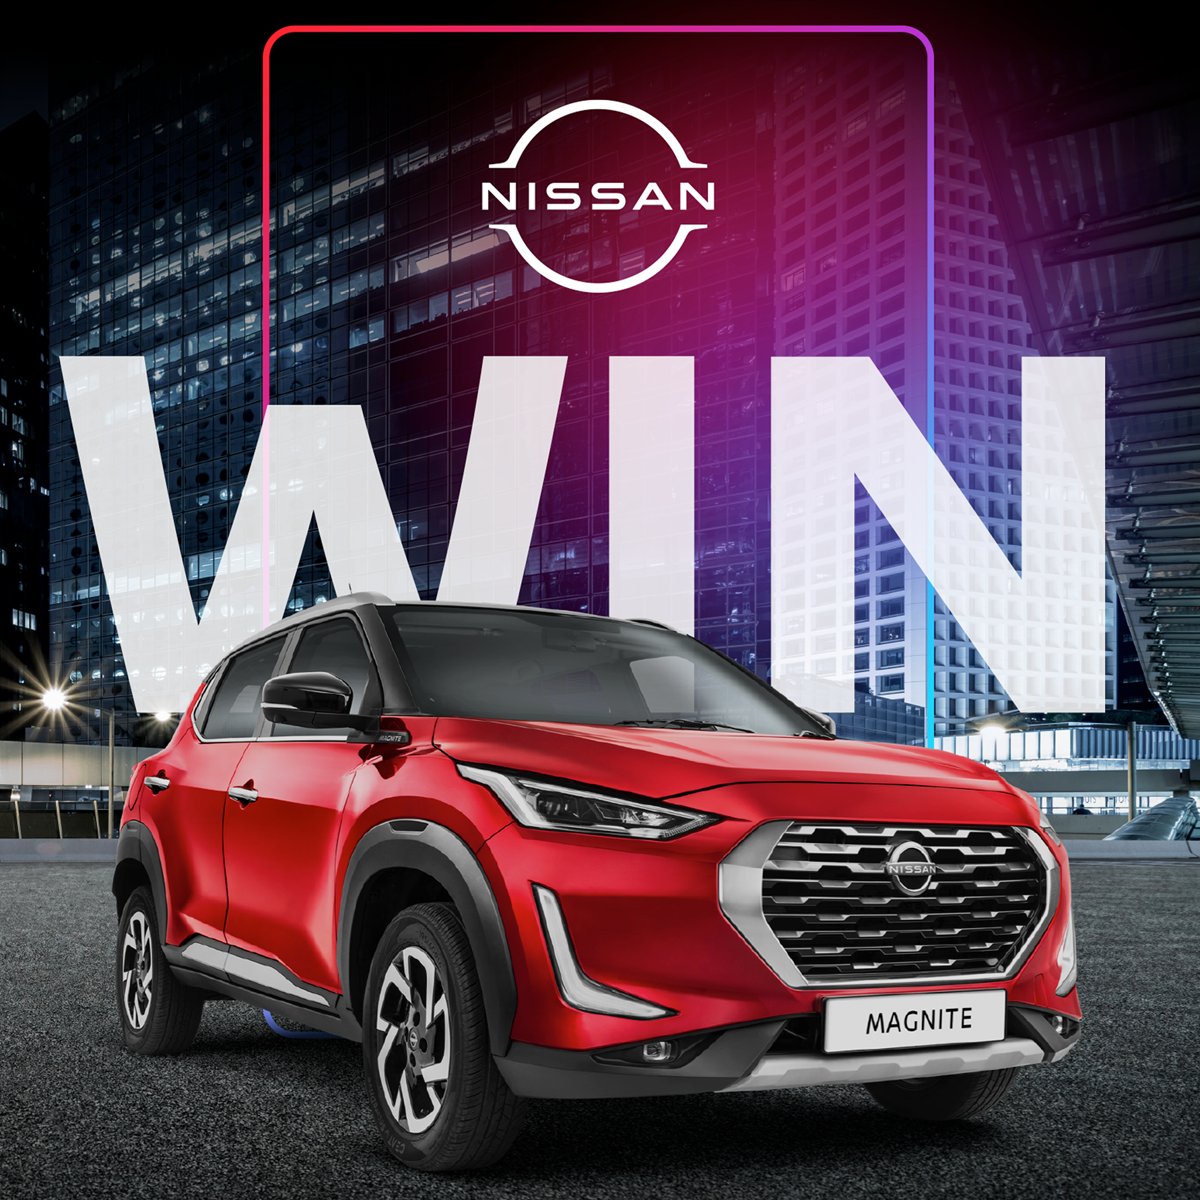 Enter Magnite Mission to stand a chance to WIN the new Nissan Magnite